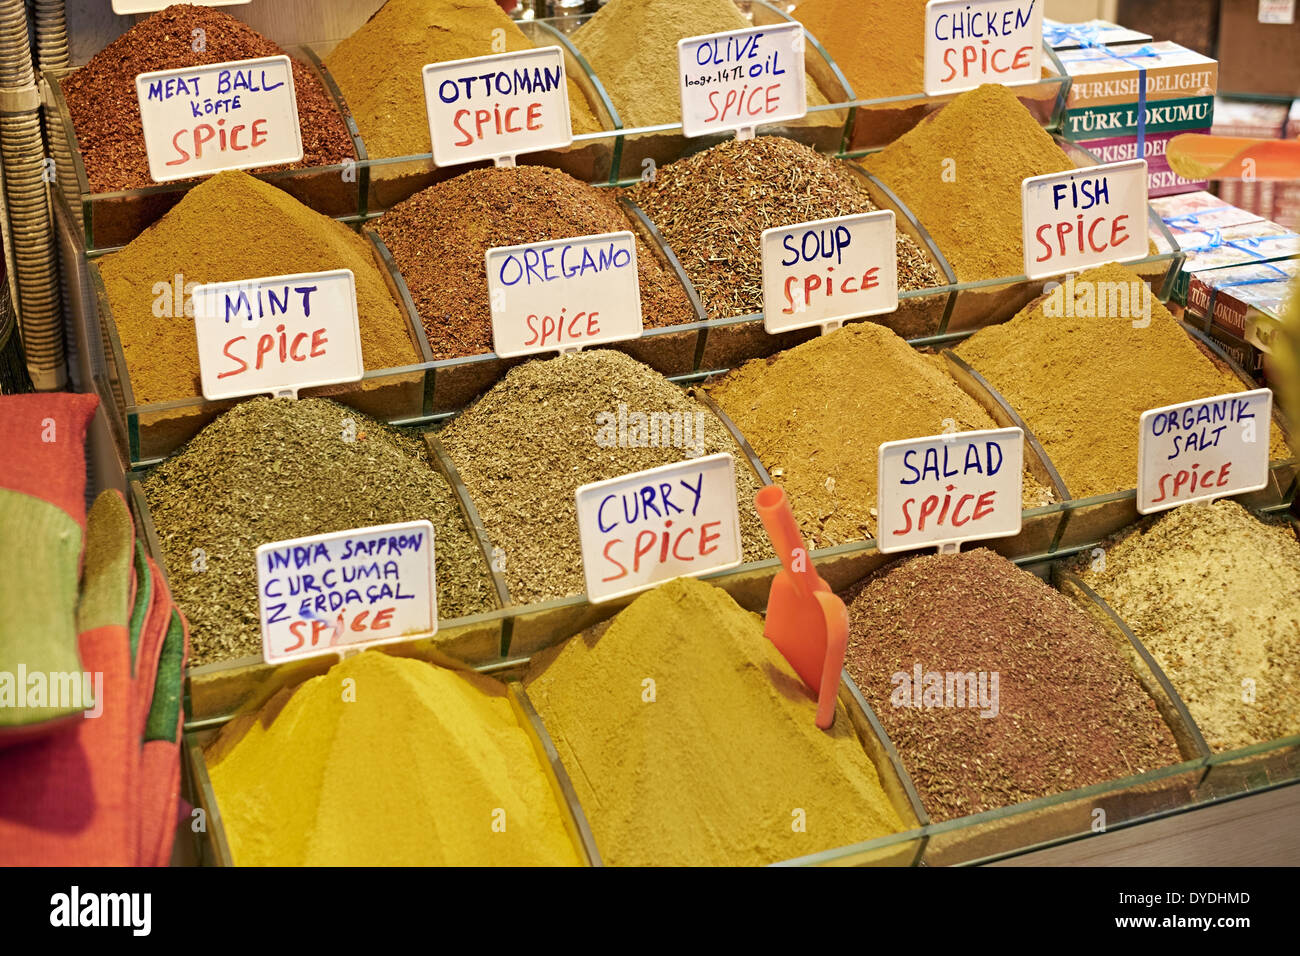 Exotic spice market at the Grand Bazaar Istanbul, Turkey Stock Photo, Royalty Free Image ...